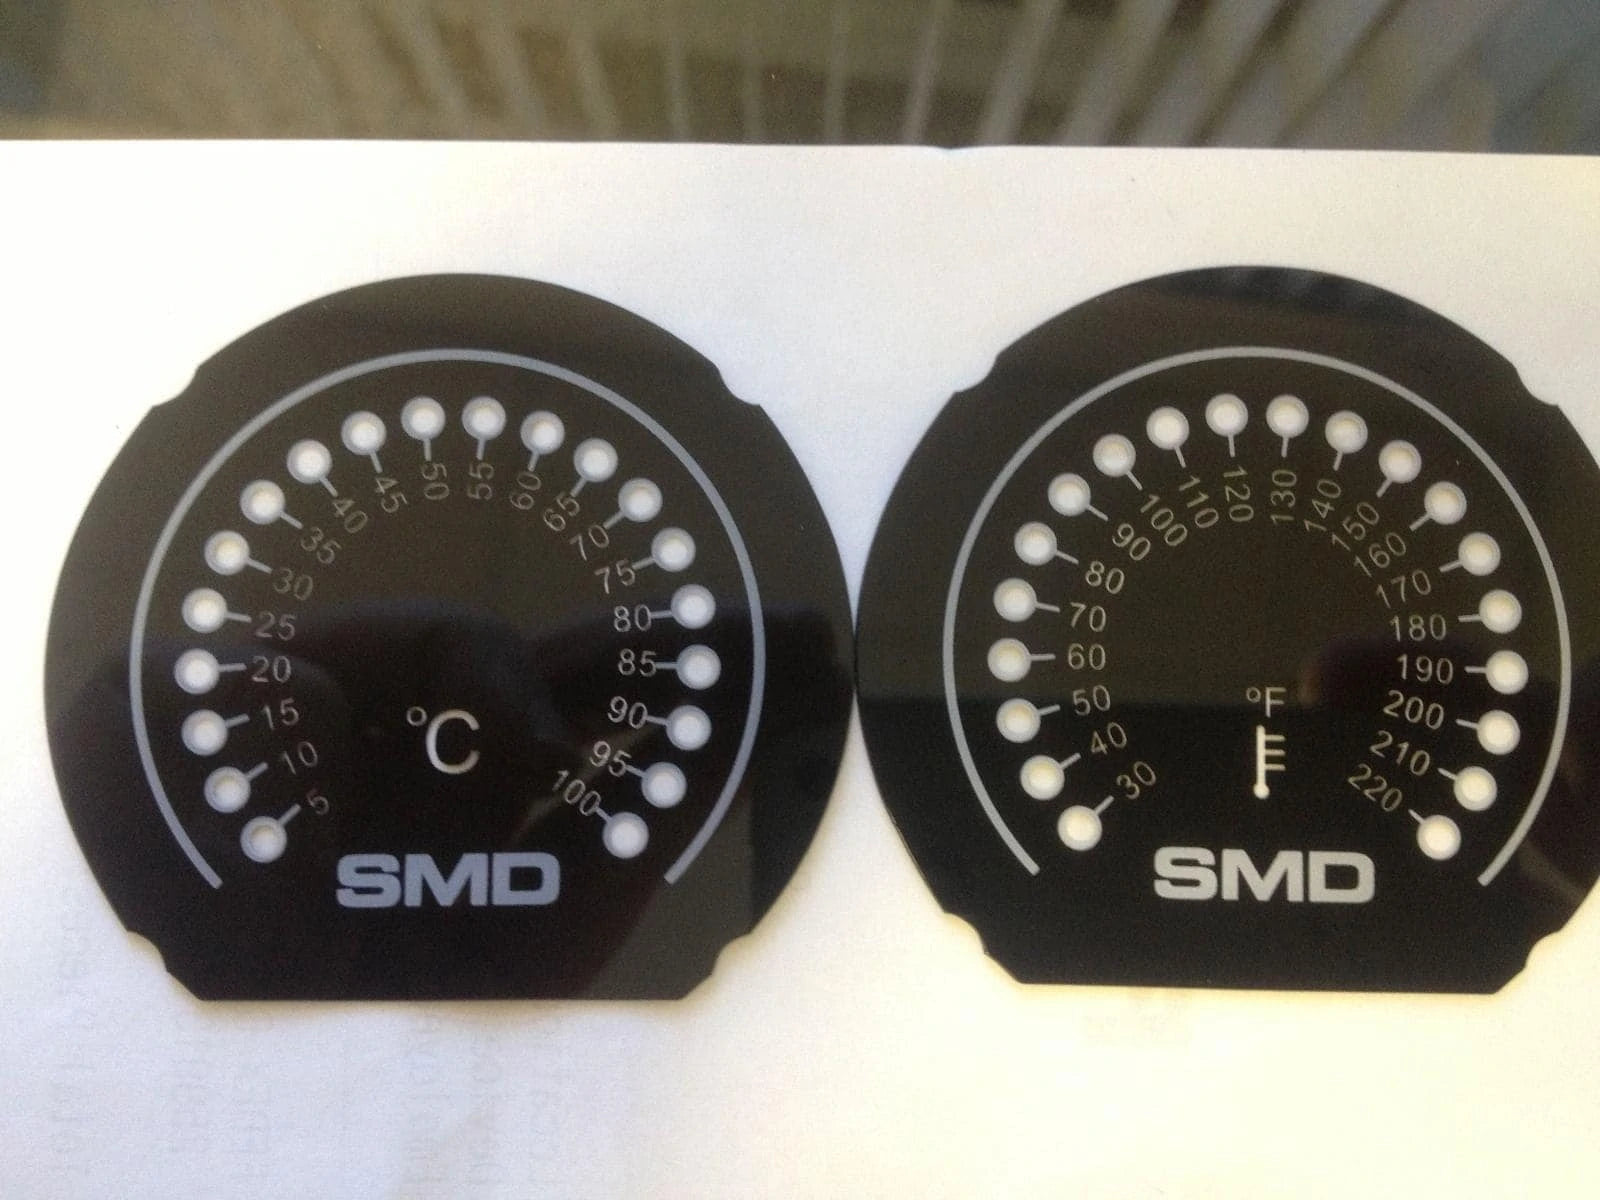 SMD TM-1 Temperature Monitor and Programmable Fan Controller